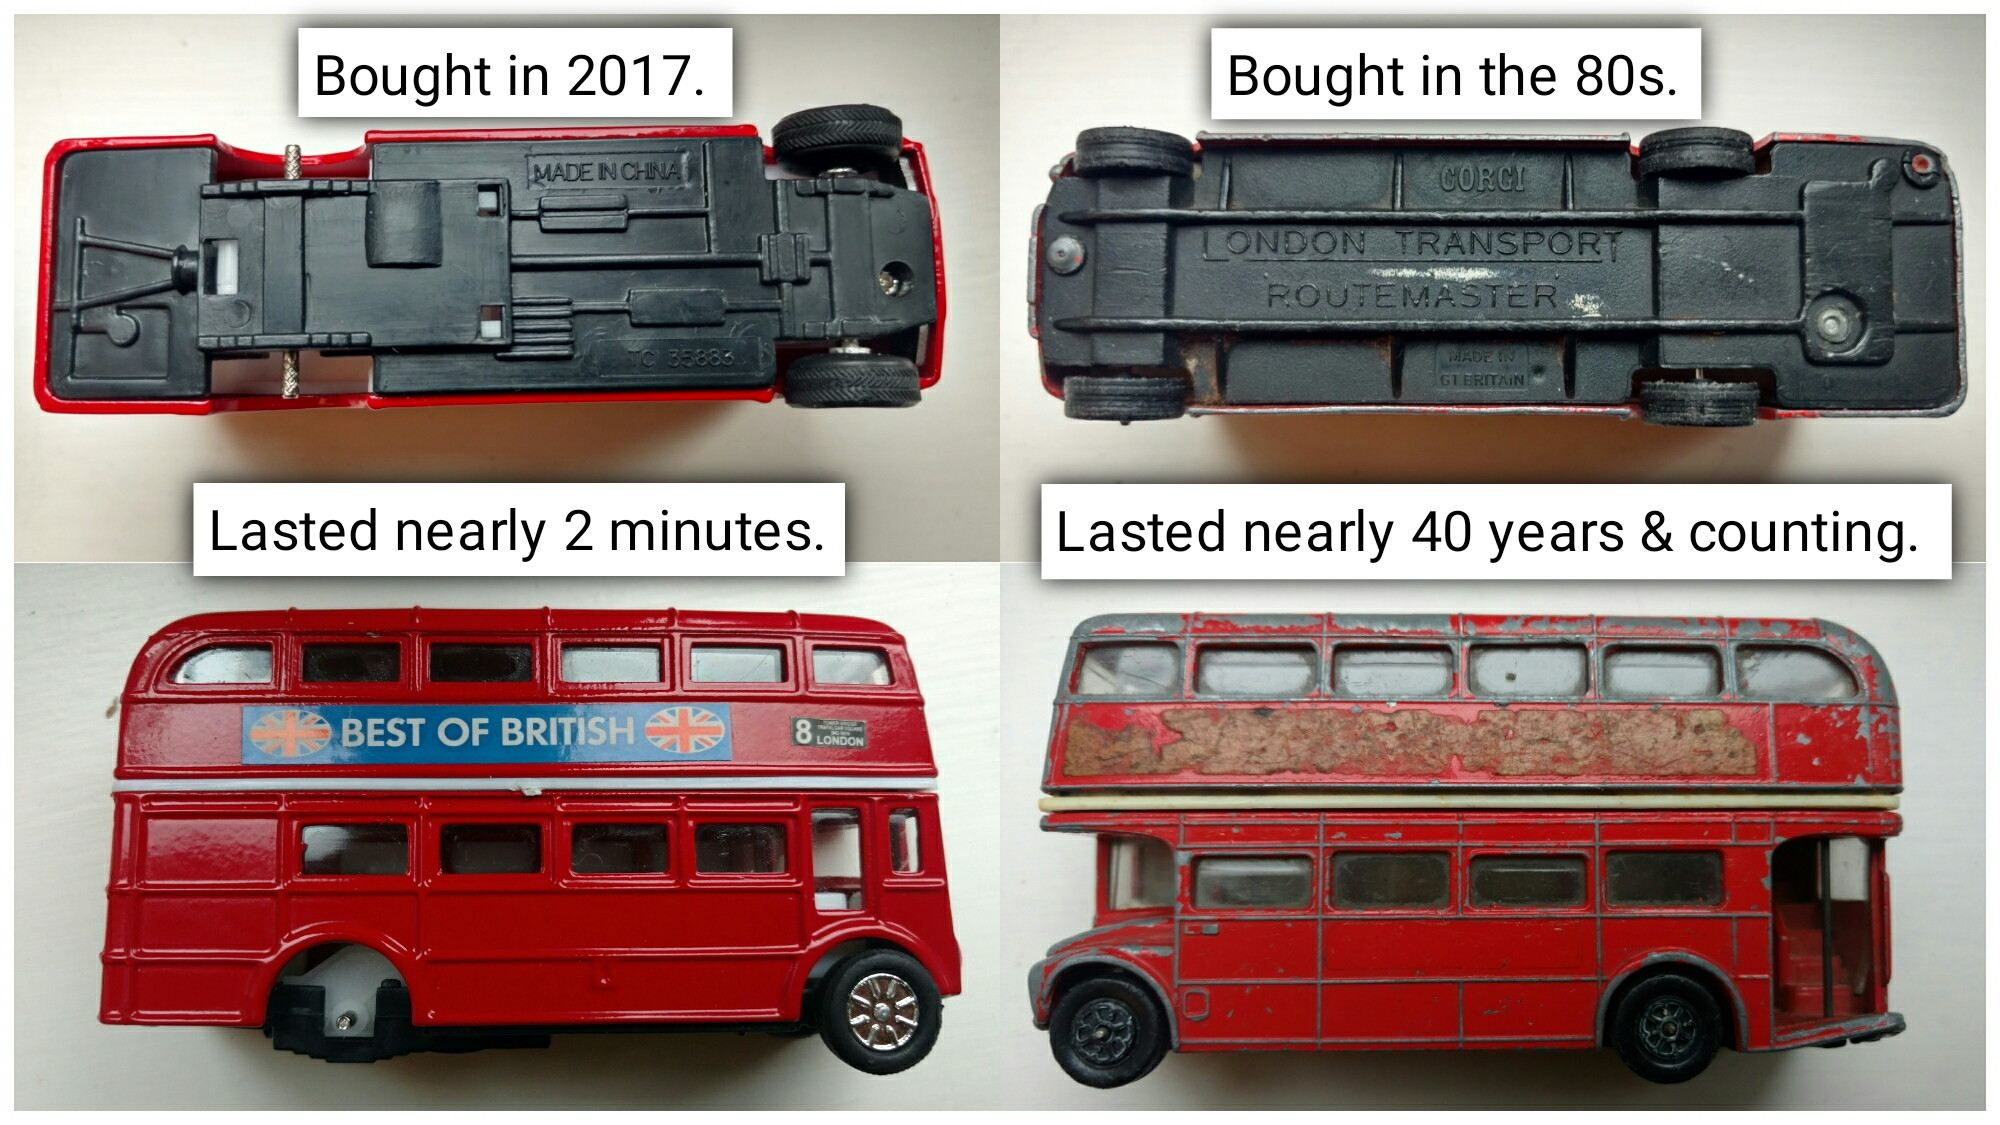 double decker bus - Bought in 2017. Bought in the 80s. Mulenge London Transport Pou Emre Lasted nearly 2 minutes. Lasted nearly 40 years & counting. Best Of British